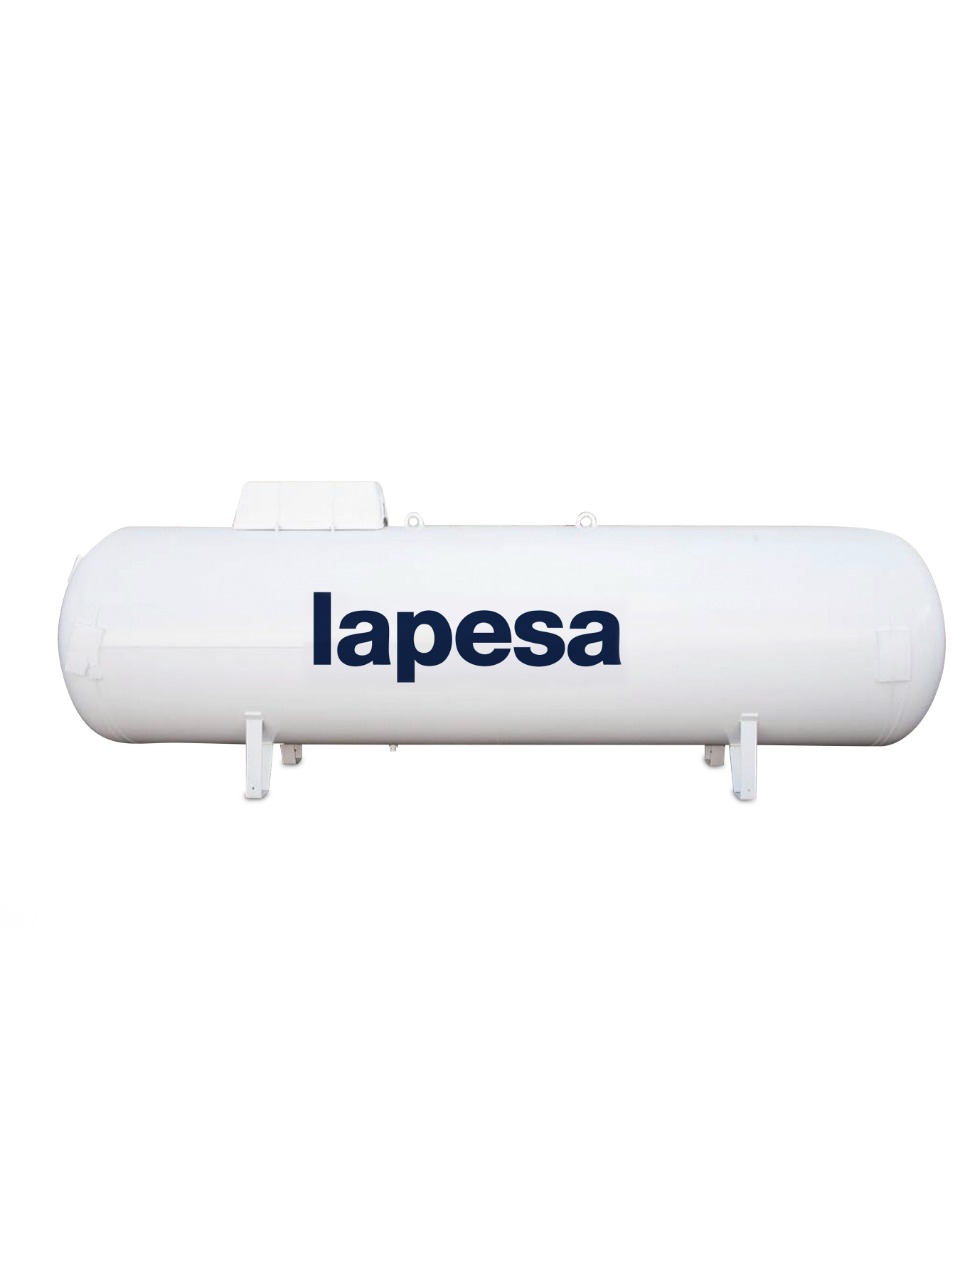 LPG TANK LAPESA 7090 LITERS ABOVE GROUND WITH STANDARD VALVE FITTINGS from Gas Equipment Company Llc Abu Dhabi, UNITED ARAB EMIRATES